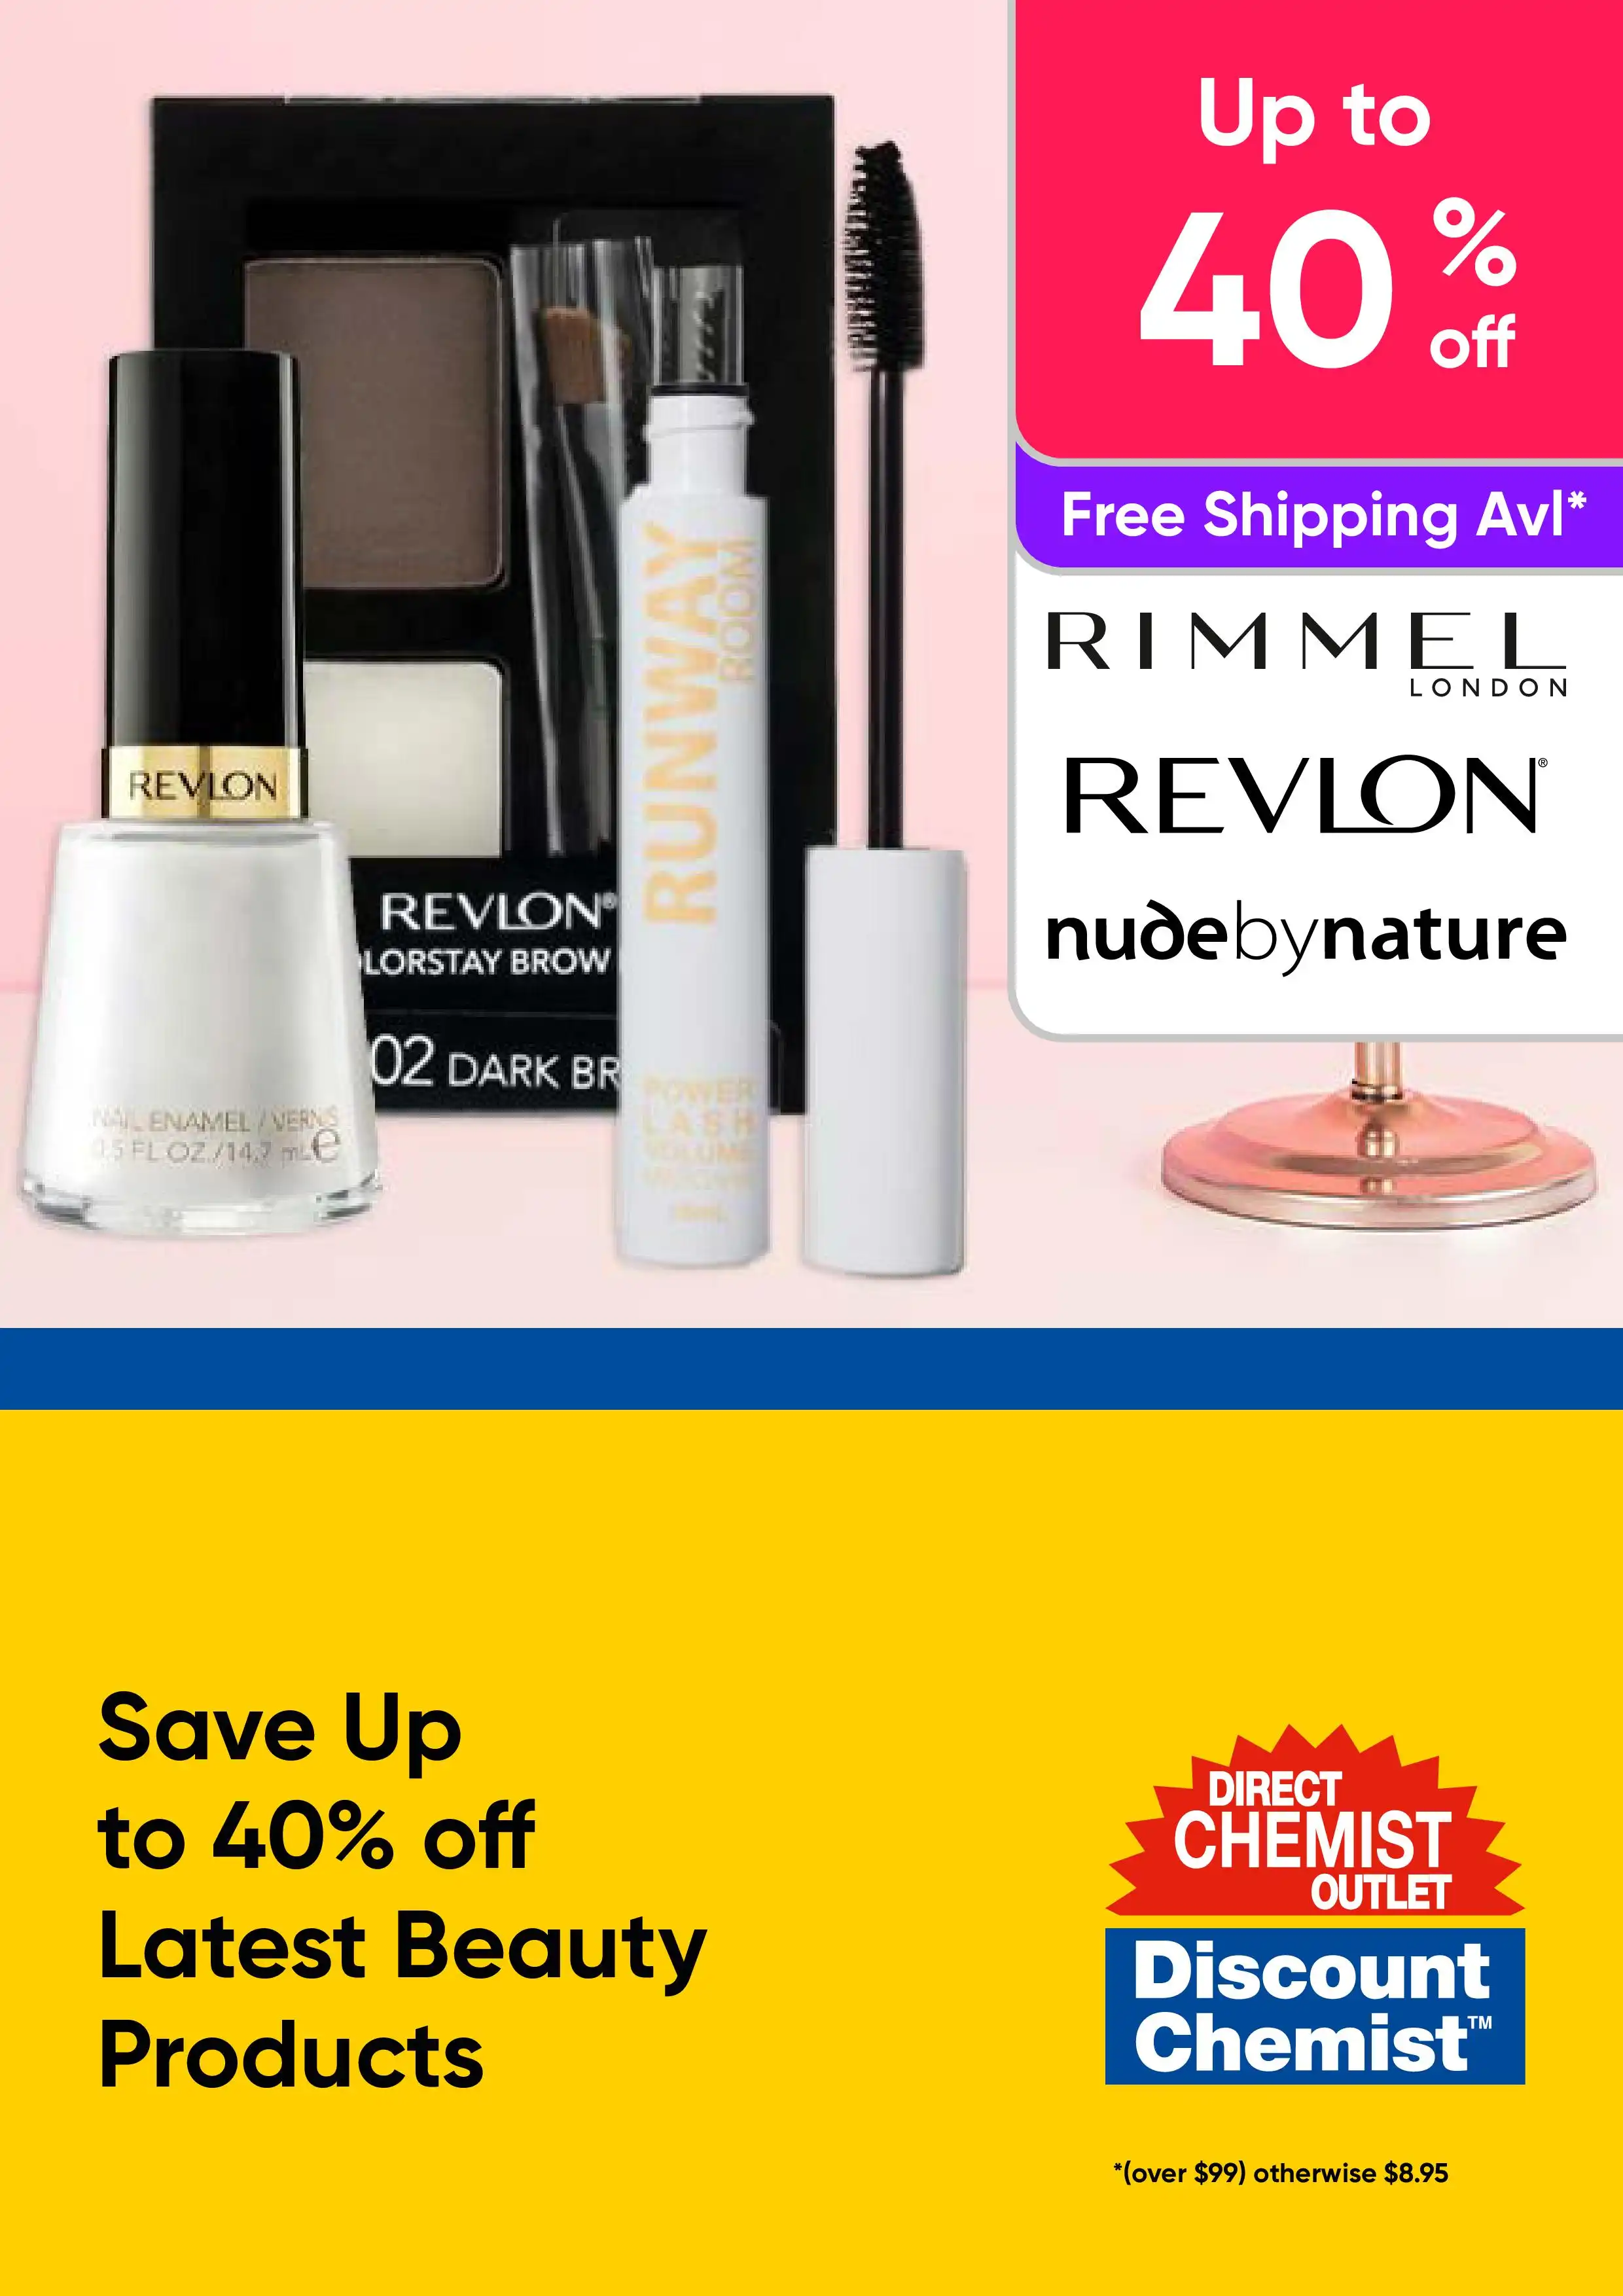 Beauty and Cosmetics Specials - Save Up to 40% off Latest Beauty Products